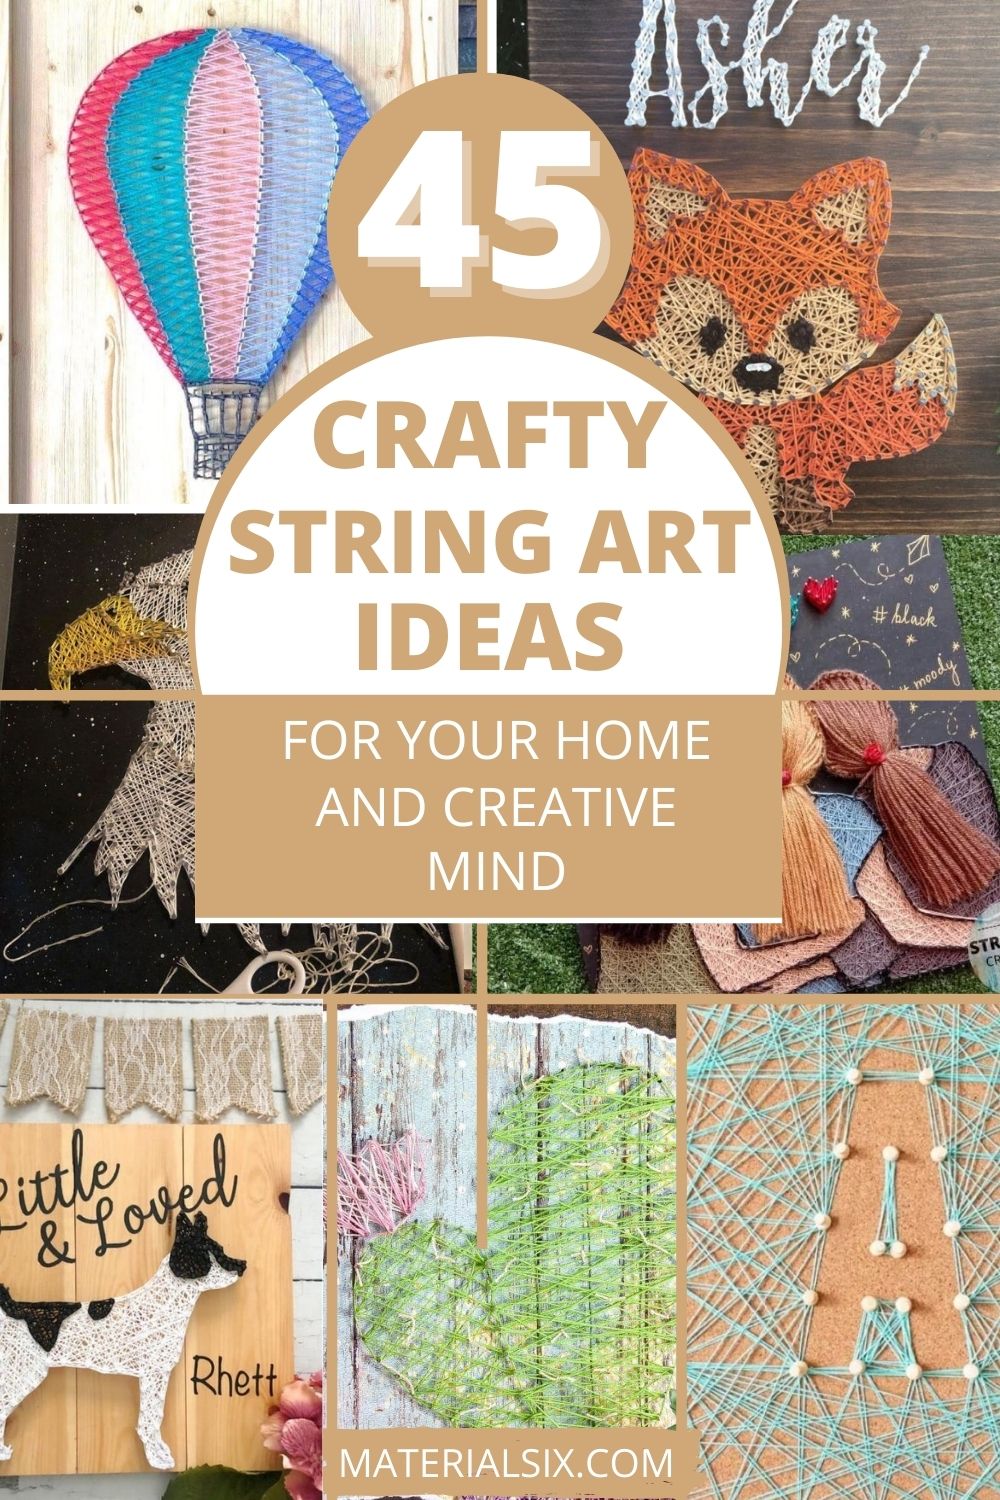 45 Crafty String Art Ideas for Your Home and Creative Mind